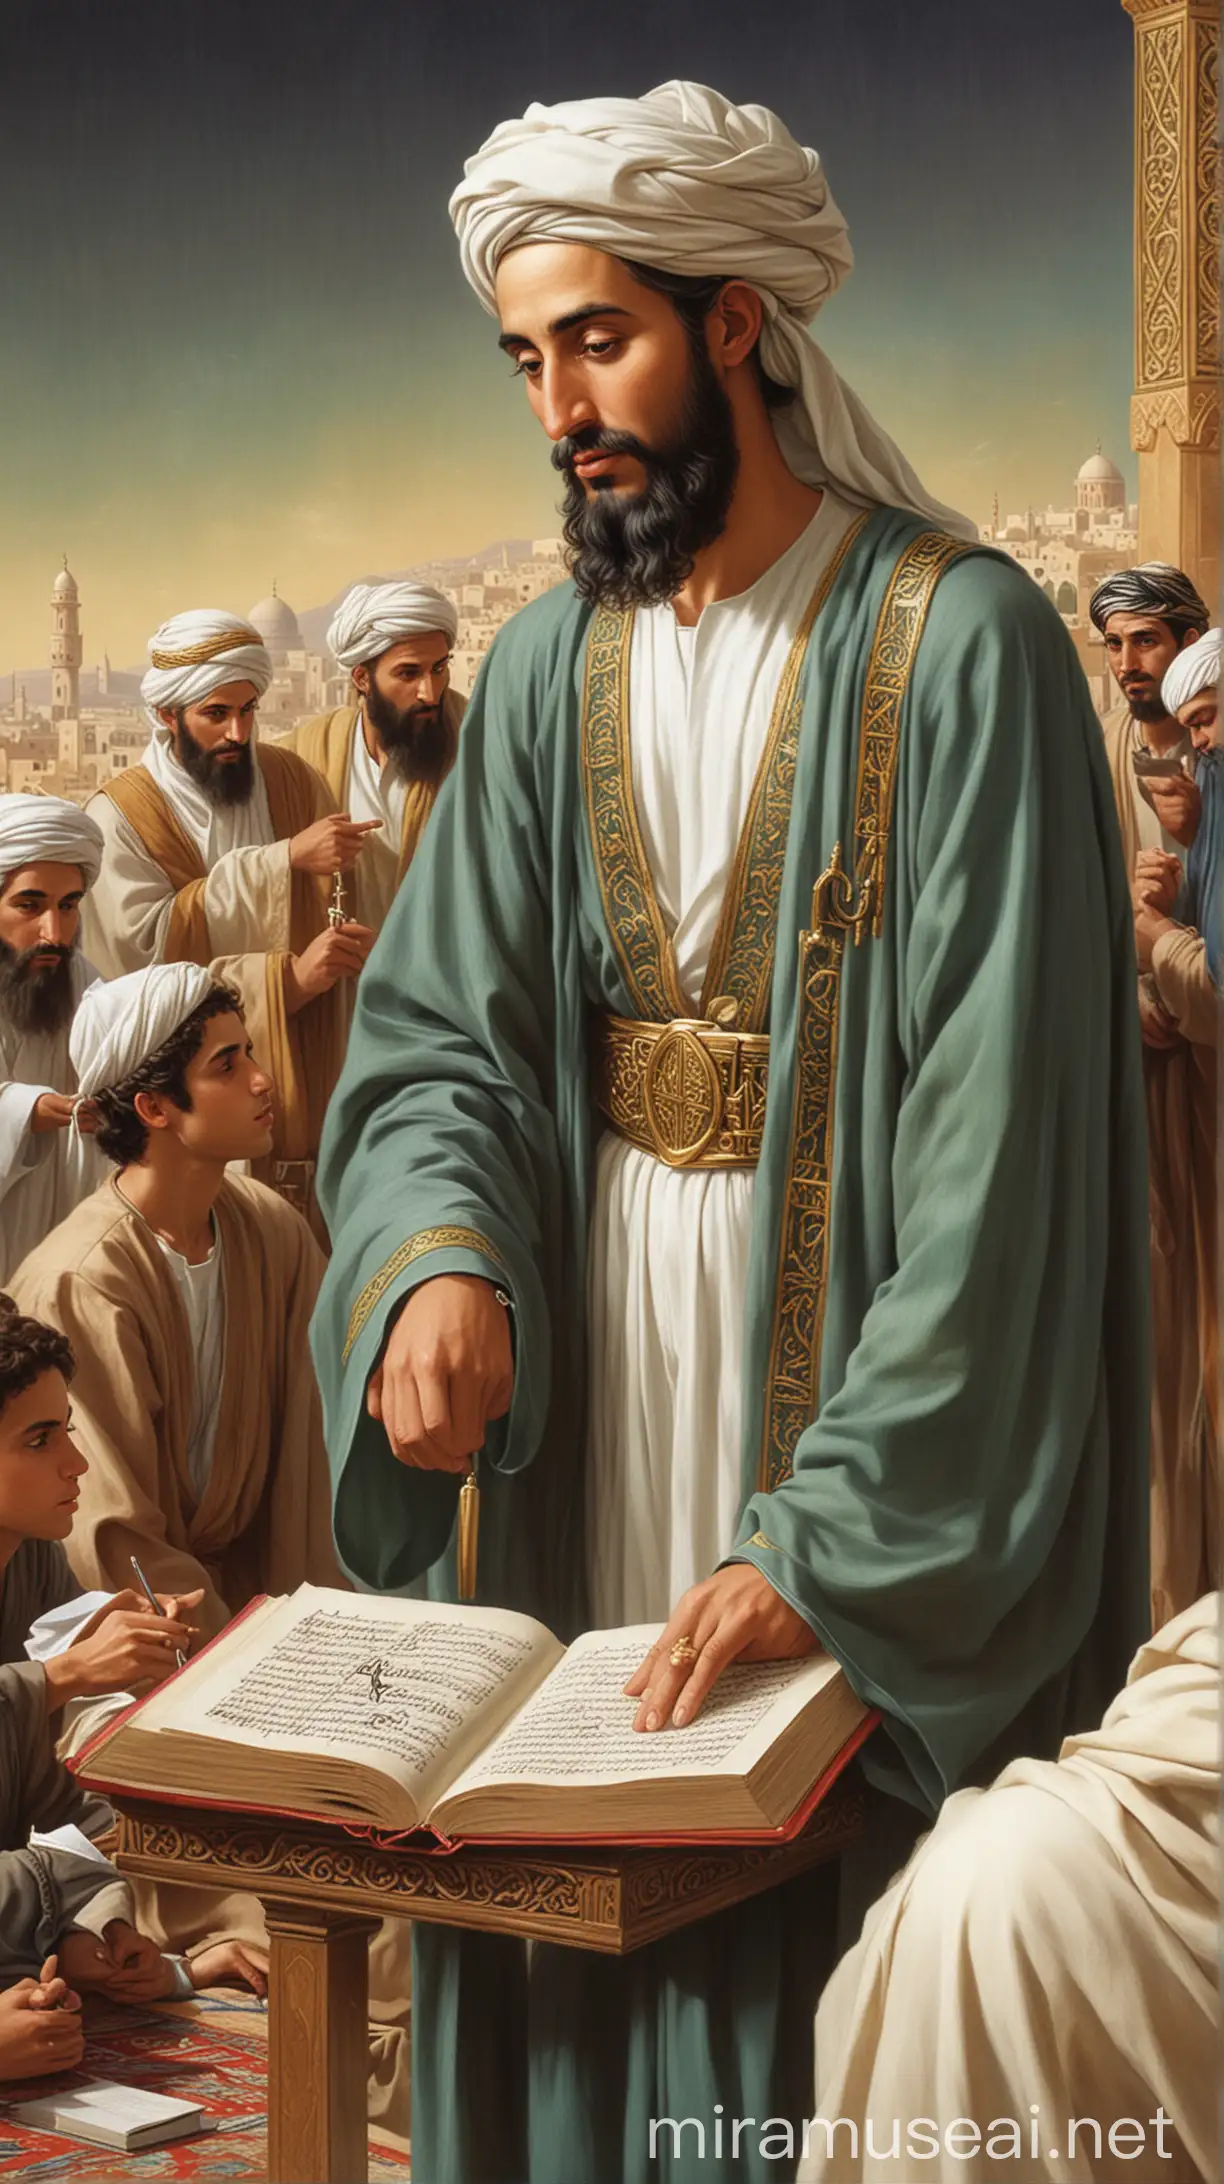 Prophet Muhammad (peace be upon him) encouraging his companions to engage in critical thinking and pursue knowledge, illustrating his role as a teacher and mentor.
